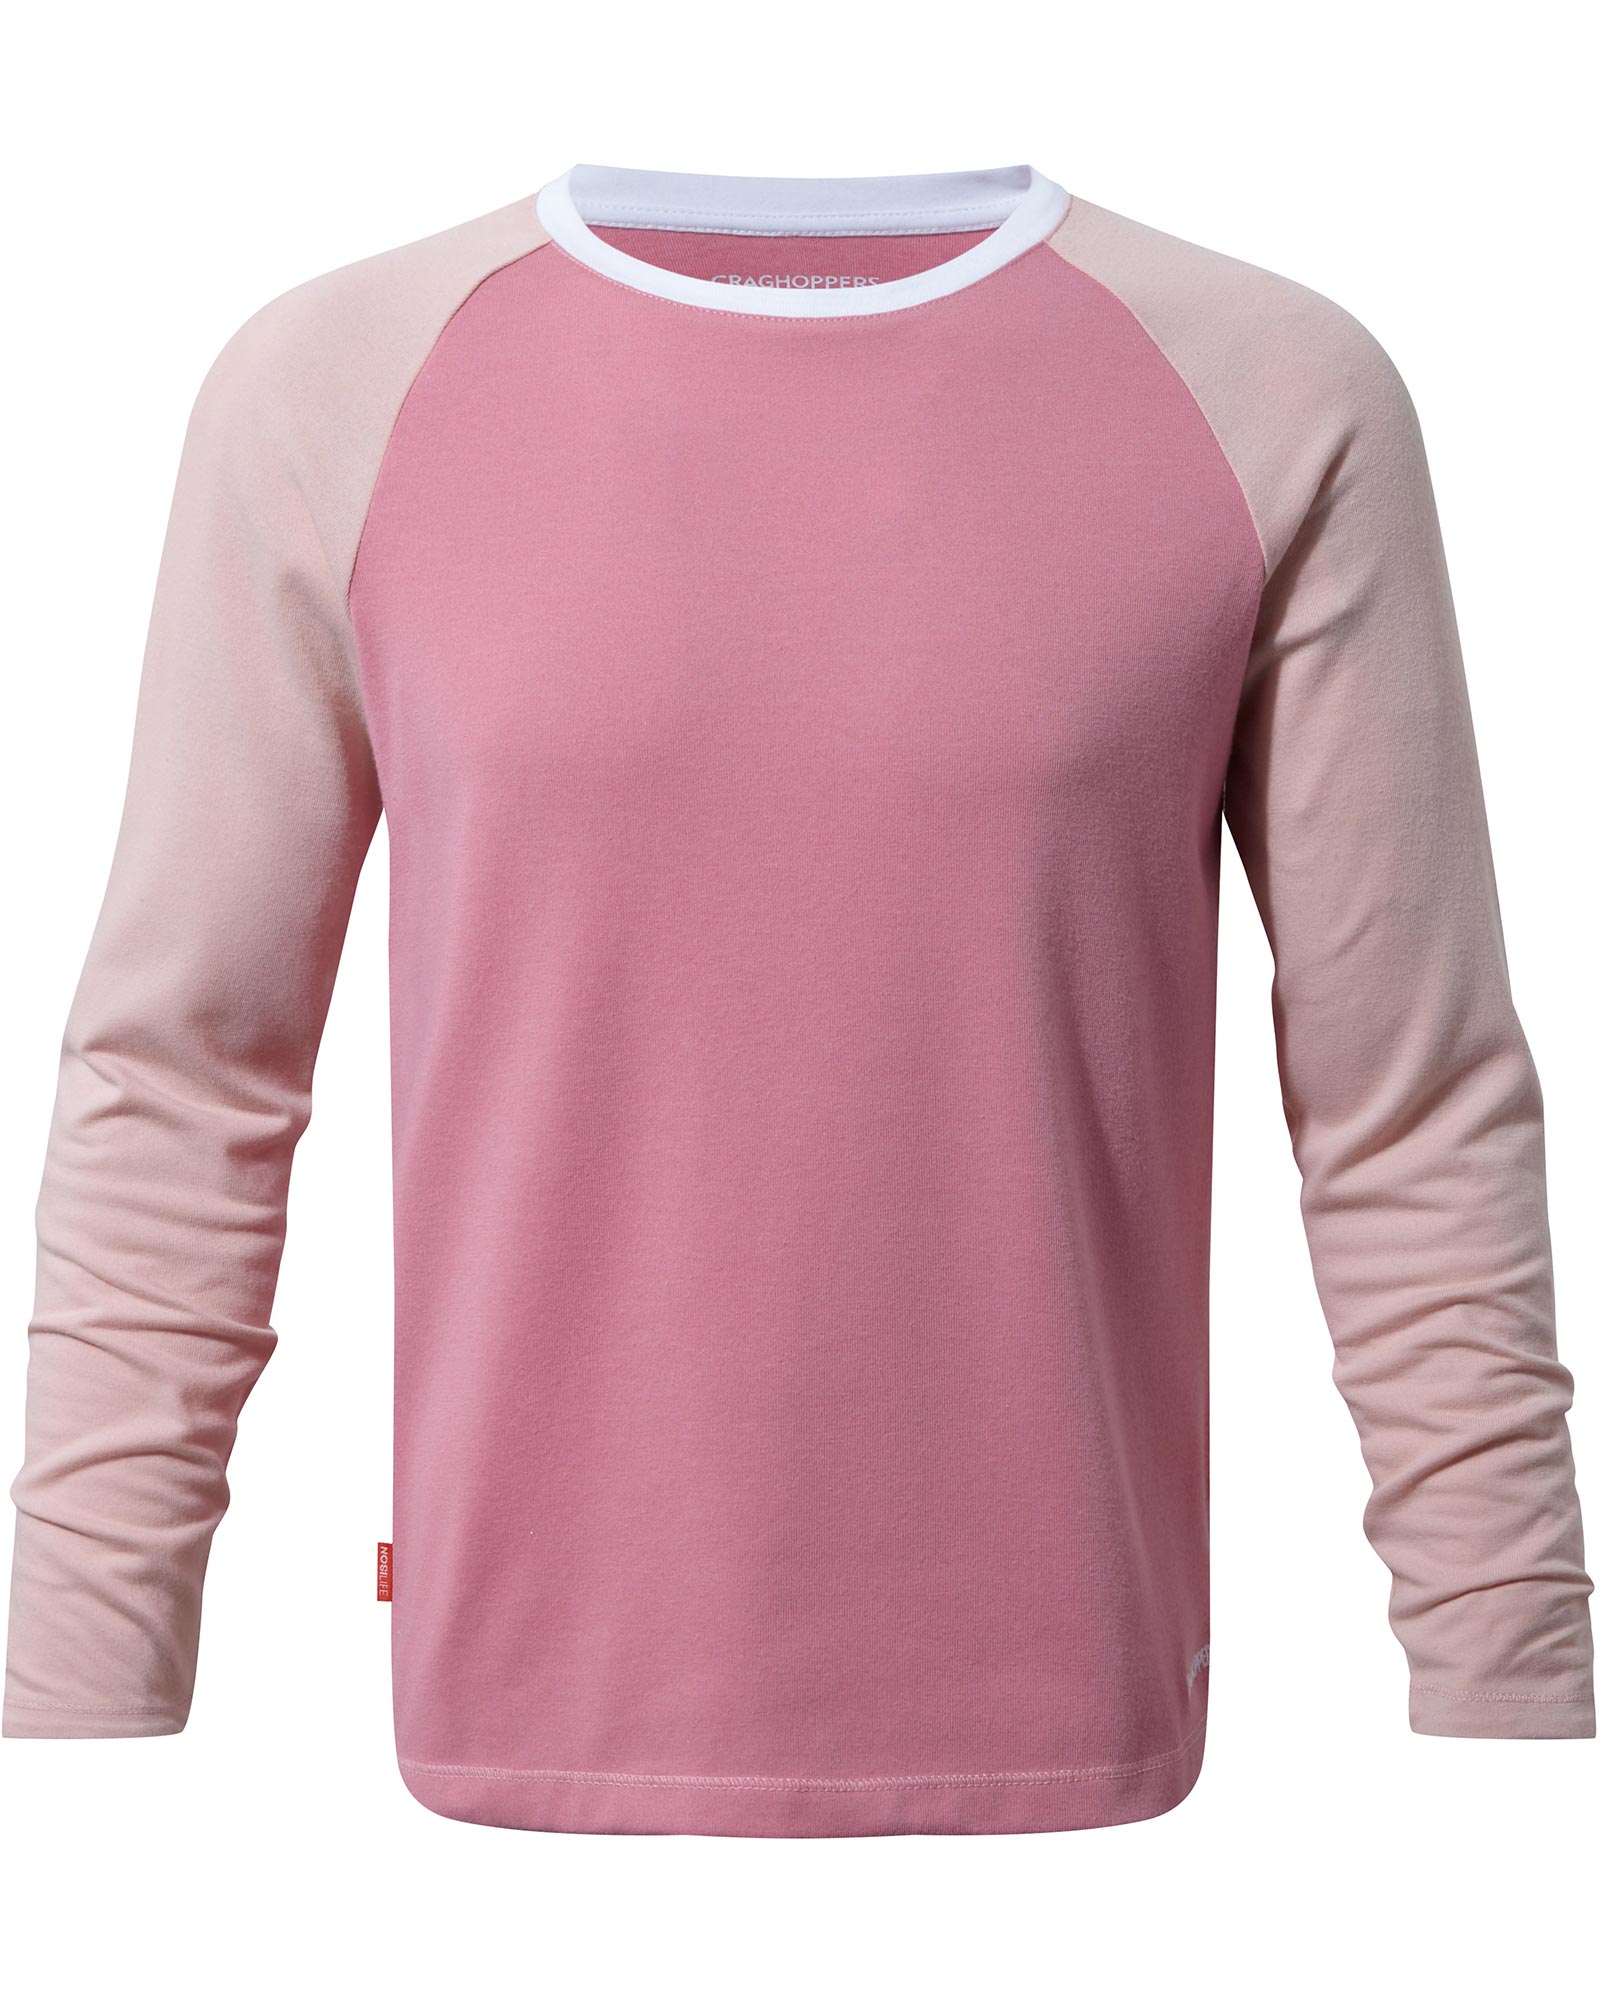 Craghoppers NosiLife Barnaby Kids’ Long Sleeve T Shirt - English Rose 11 Years